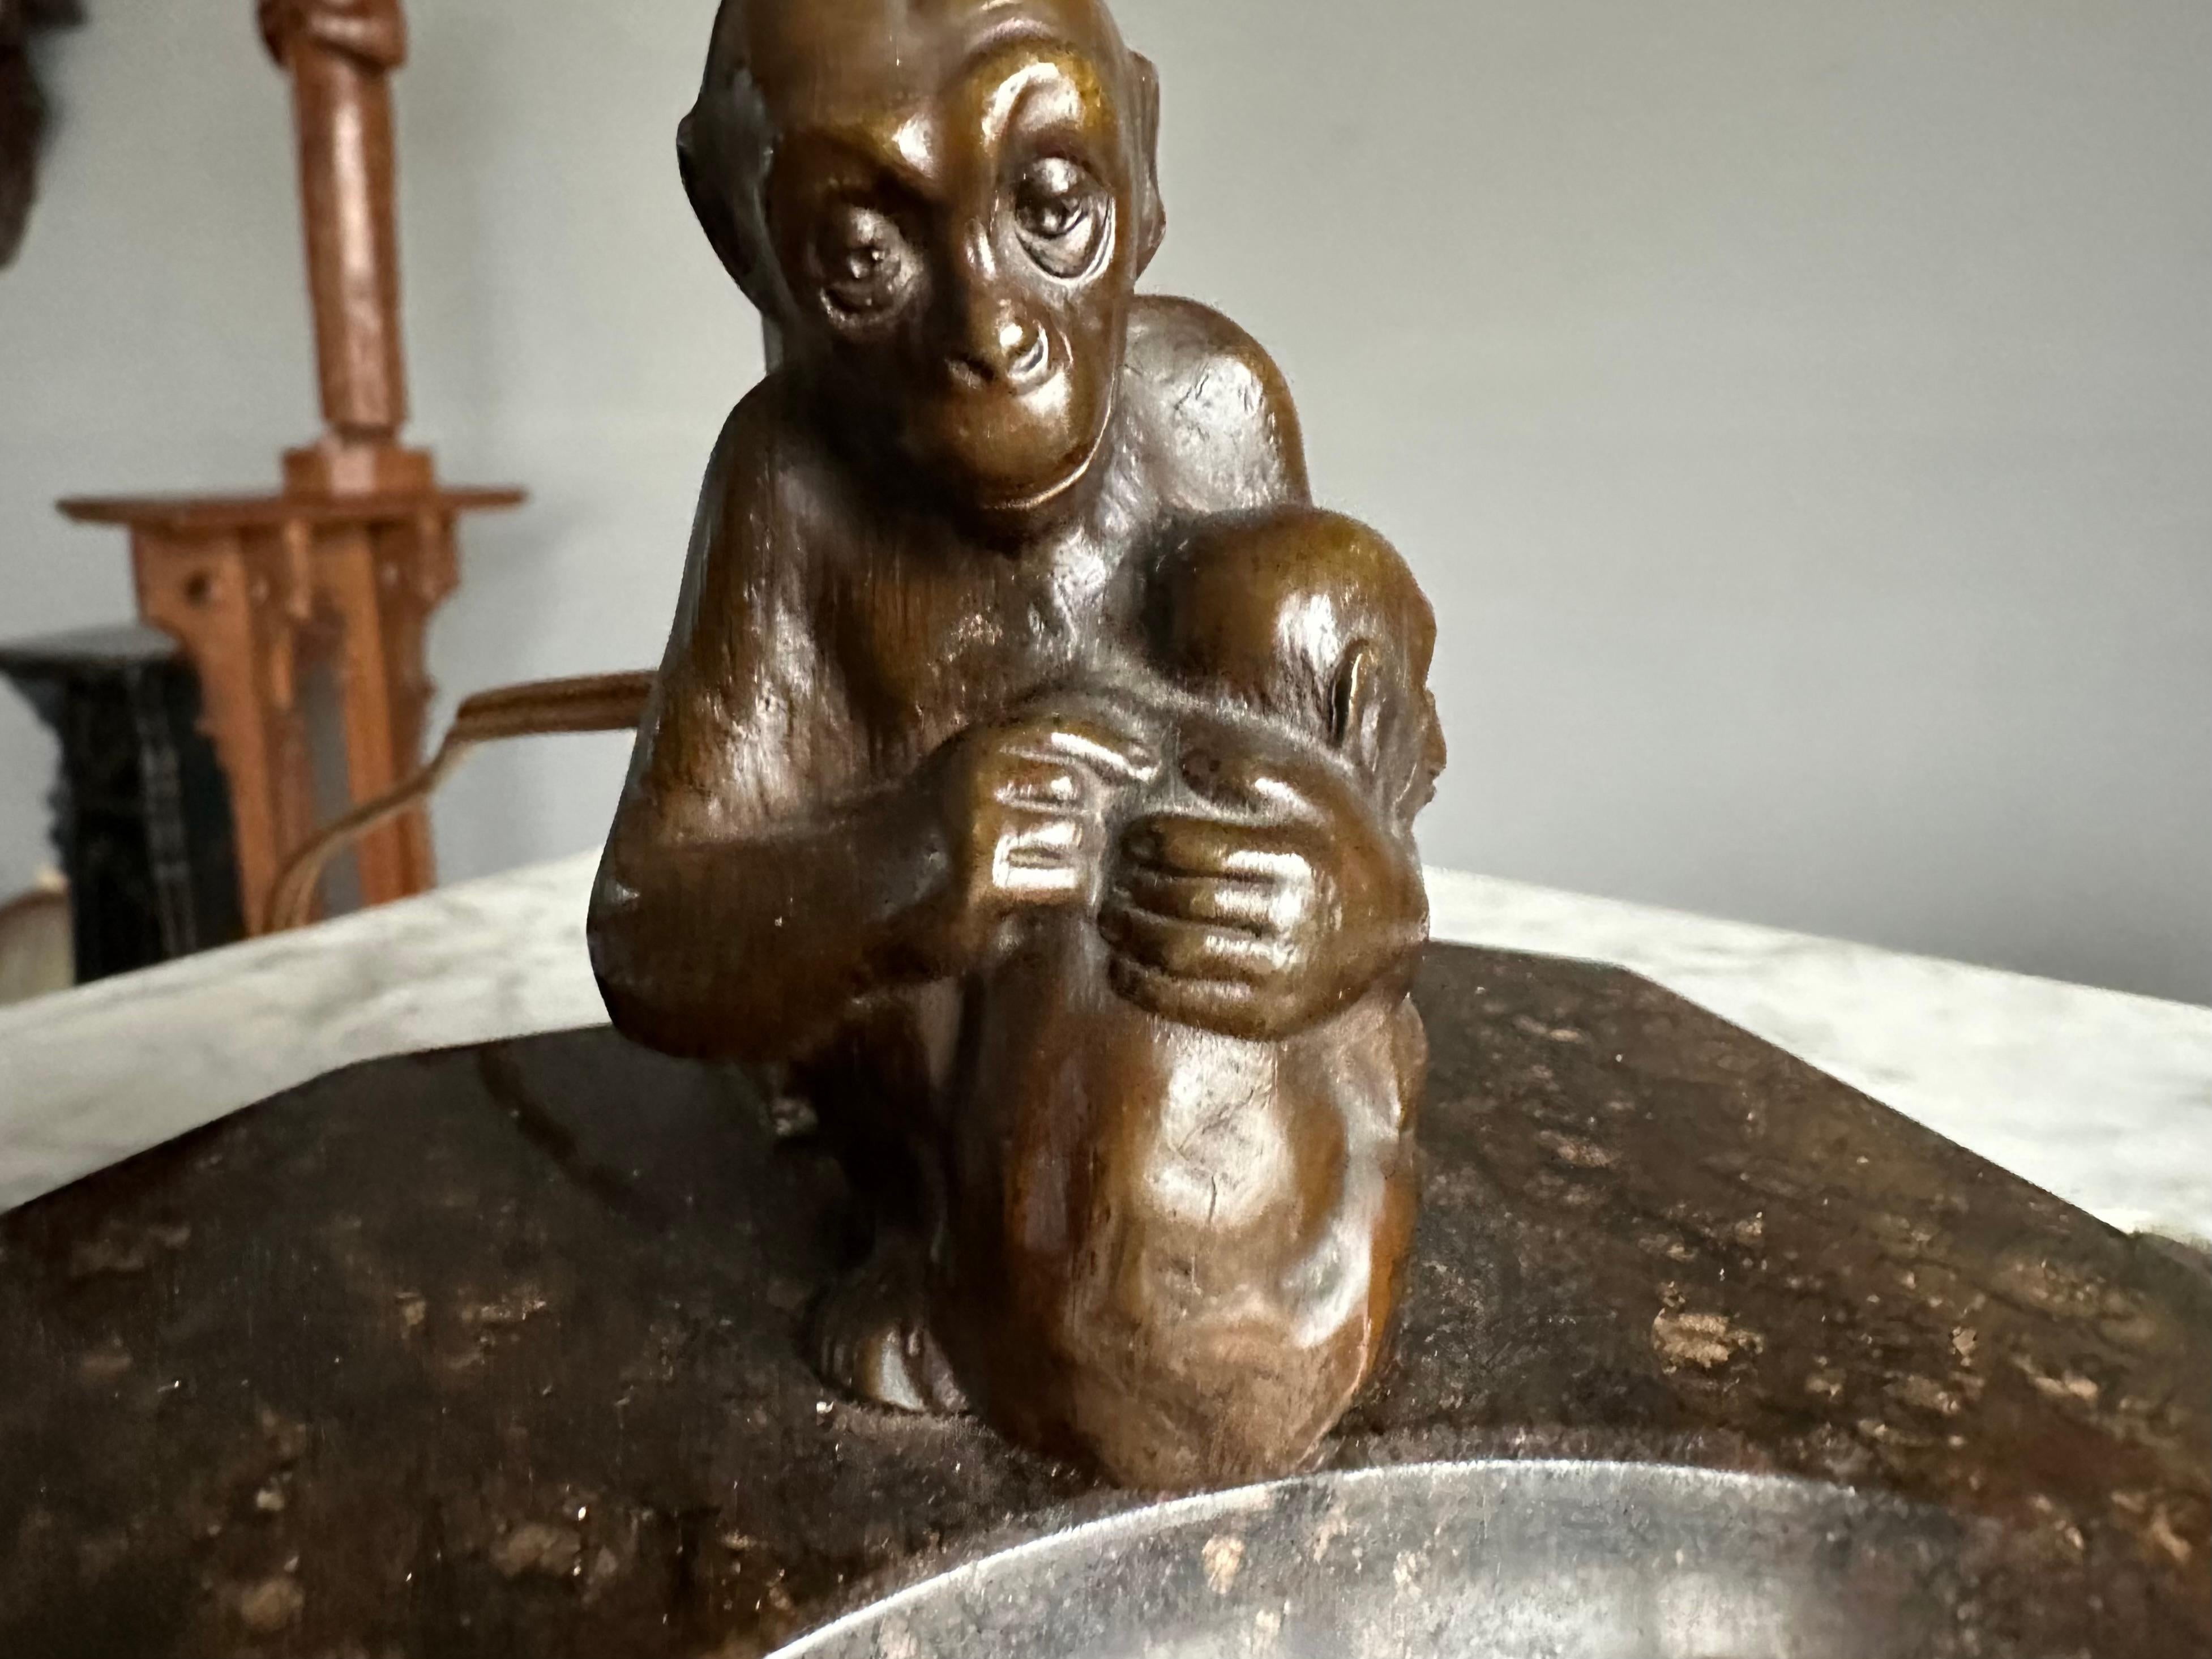 Very Decorative & Artistic Table Desk Lamp with Bronze Grooming Chimps Sculpture For Sale 2